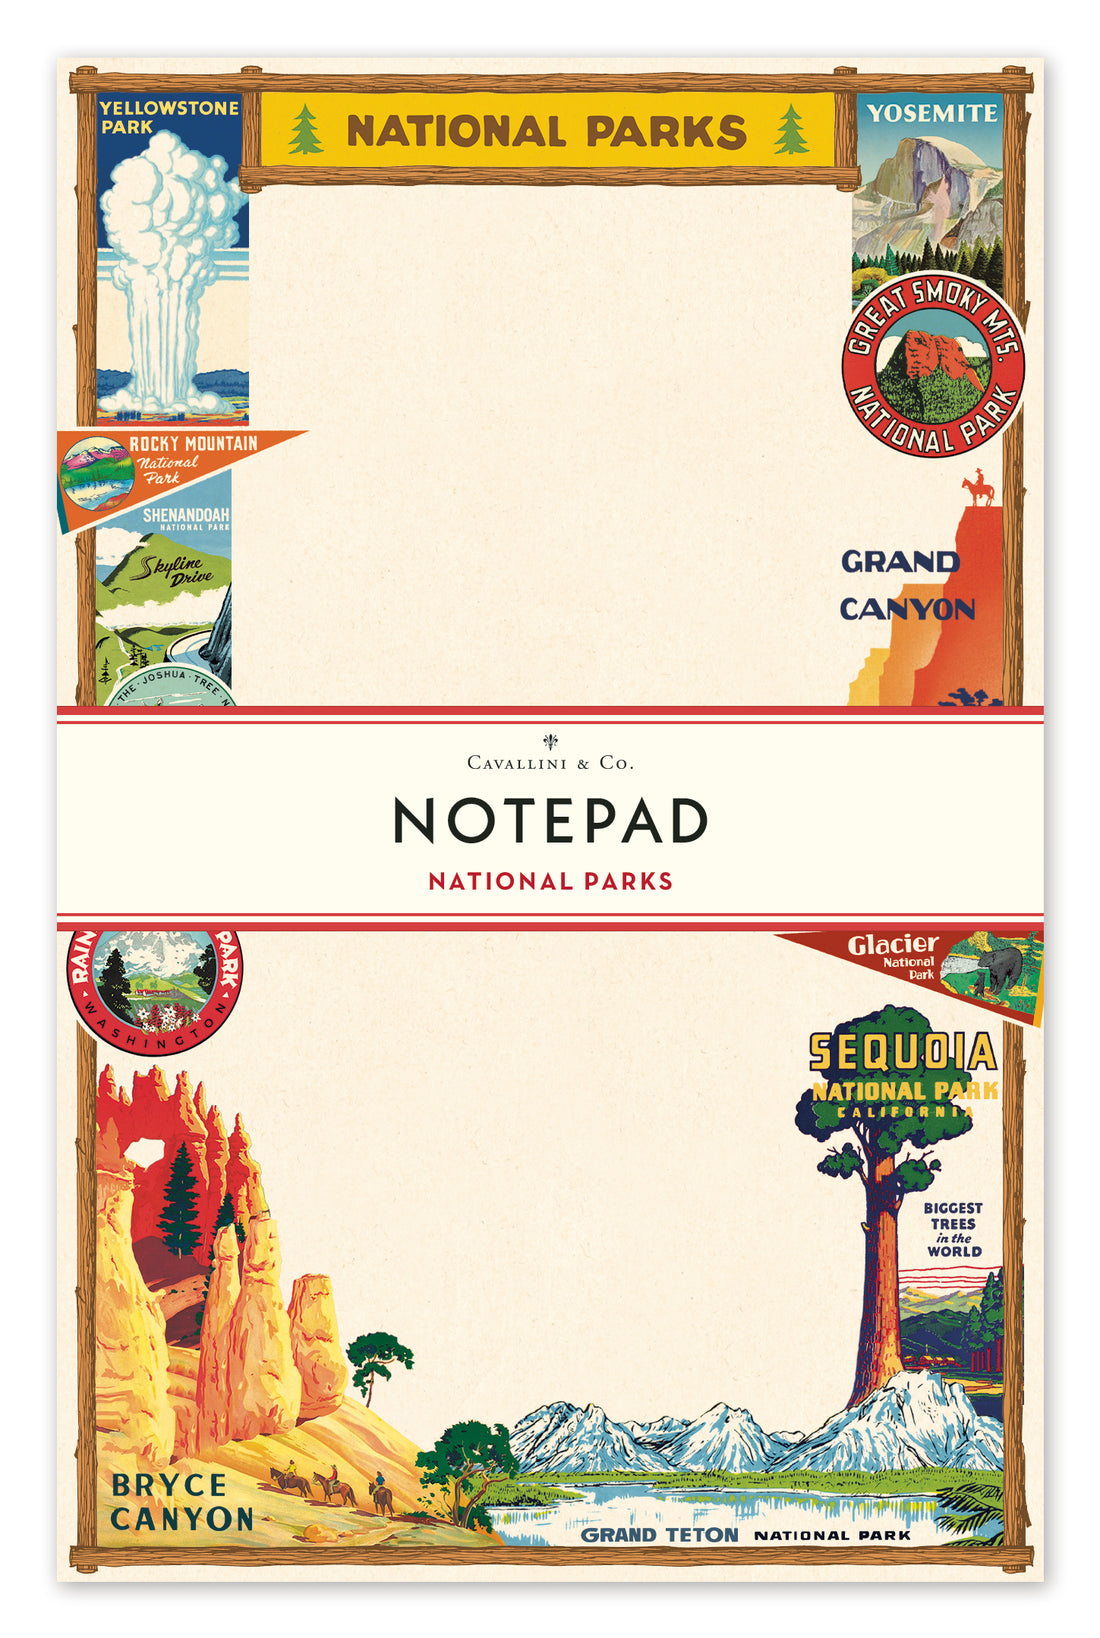 Illustrated borders showcasing American national parks from the Cavallini archives around a blank central area for text or messaging, perfect for any outdoor enthusiast. Introducing the National Parks Notepad from Cavallini Papers &amp; Co.